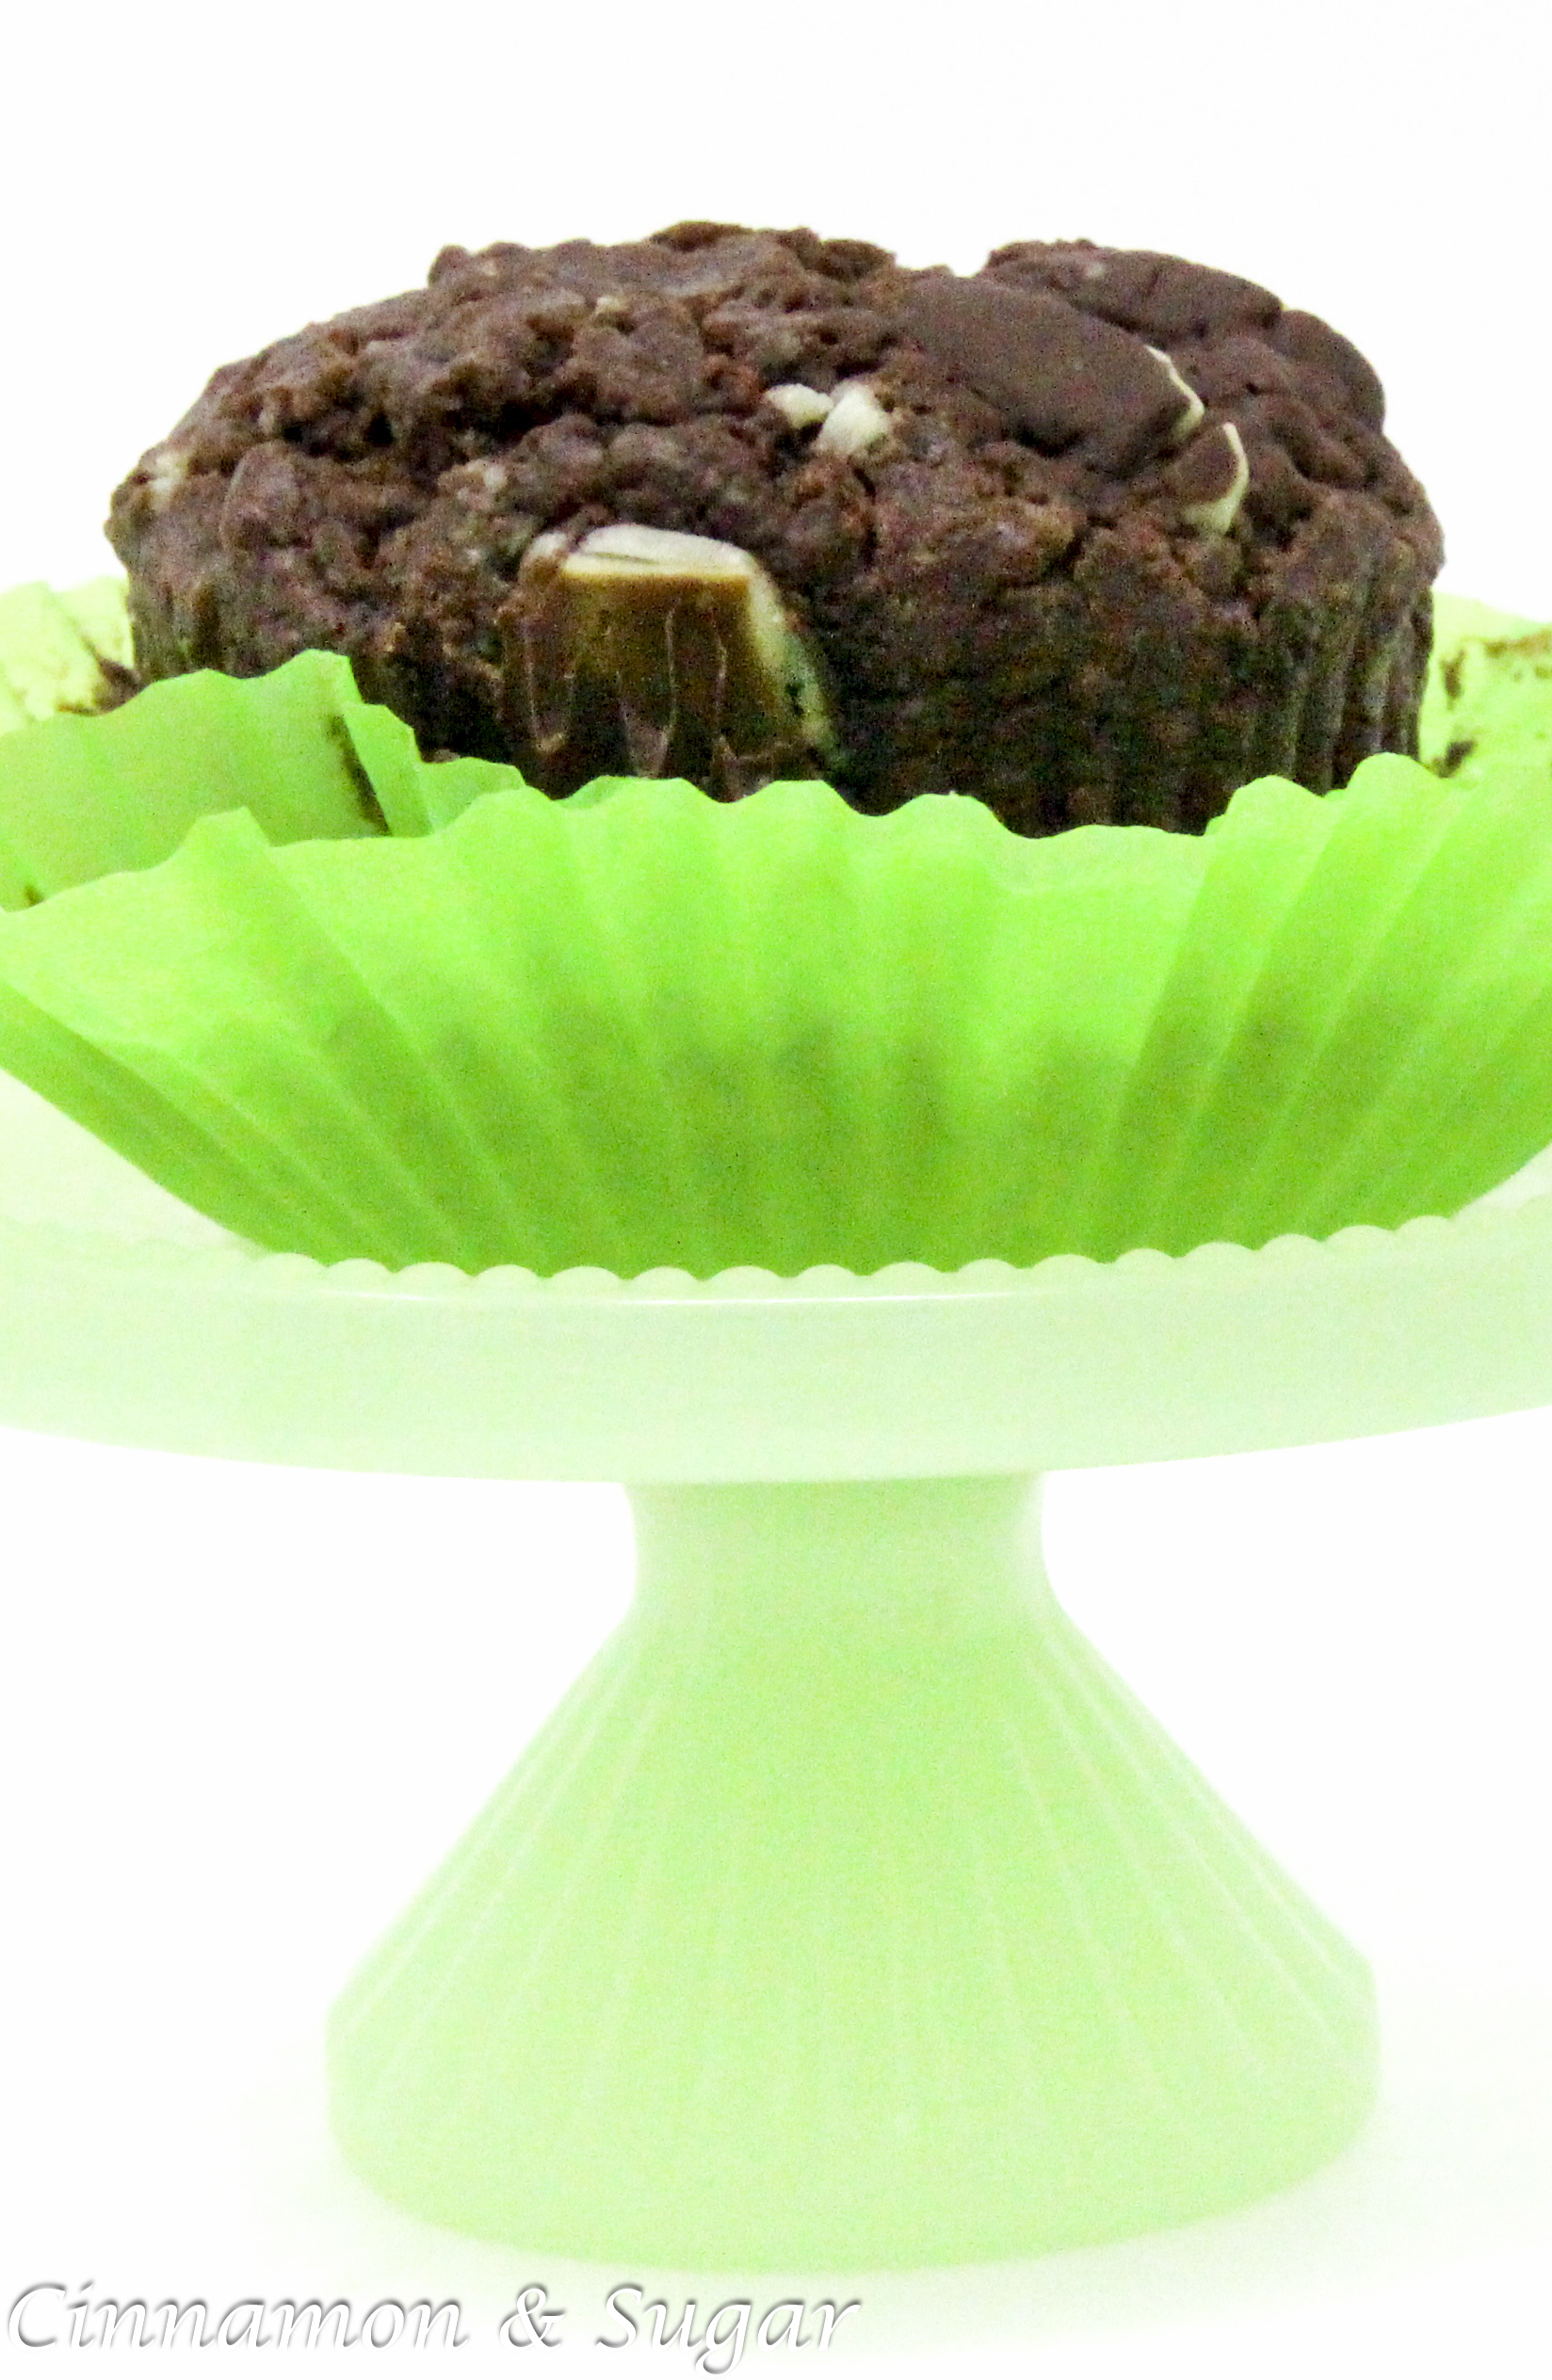 With a generous portion of of both cocoa powder and Andes Chocolate Mints, these rich Chocolate Mint Muffins could very well be classified as dessert cupcakes since they're so scrumptious! Recipe shared with permission granted by Daryl Wood Gerber, author of WINING AND DYING.